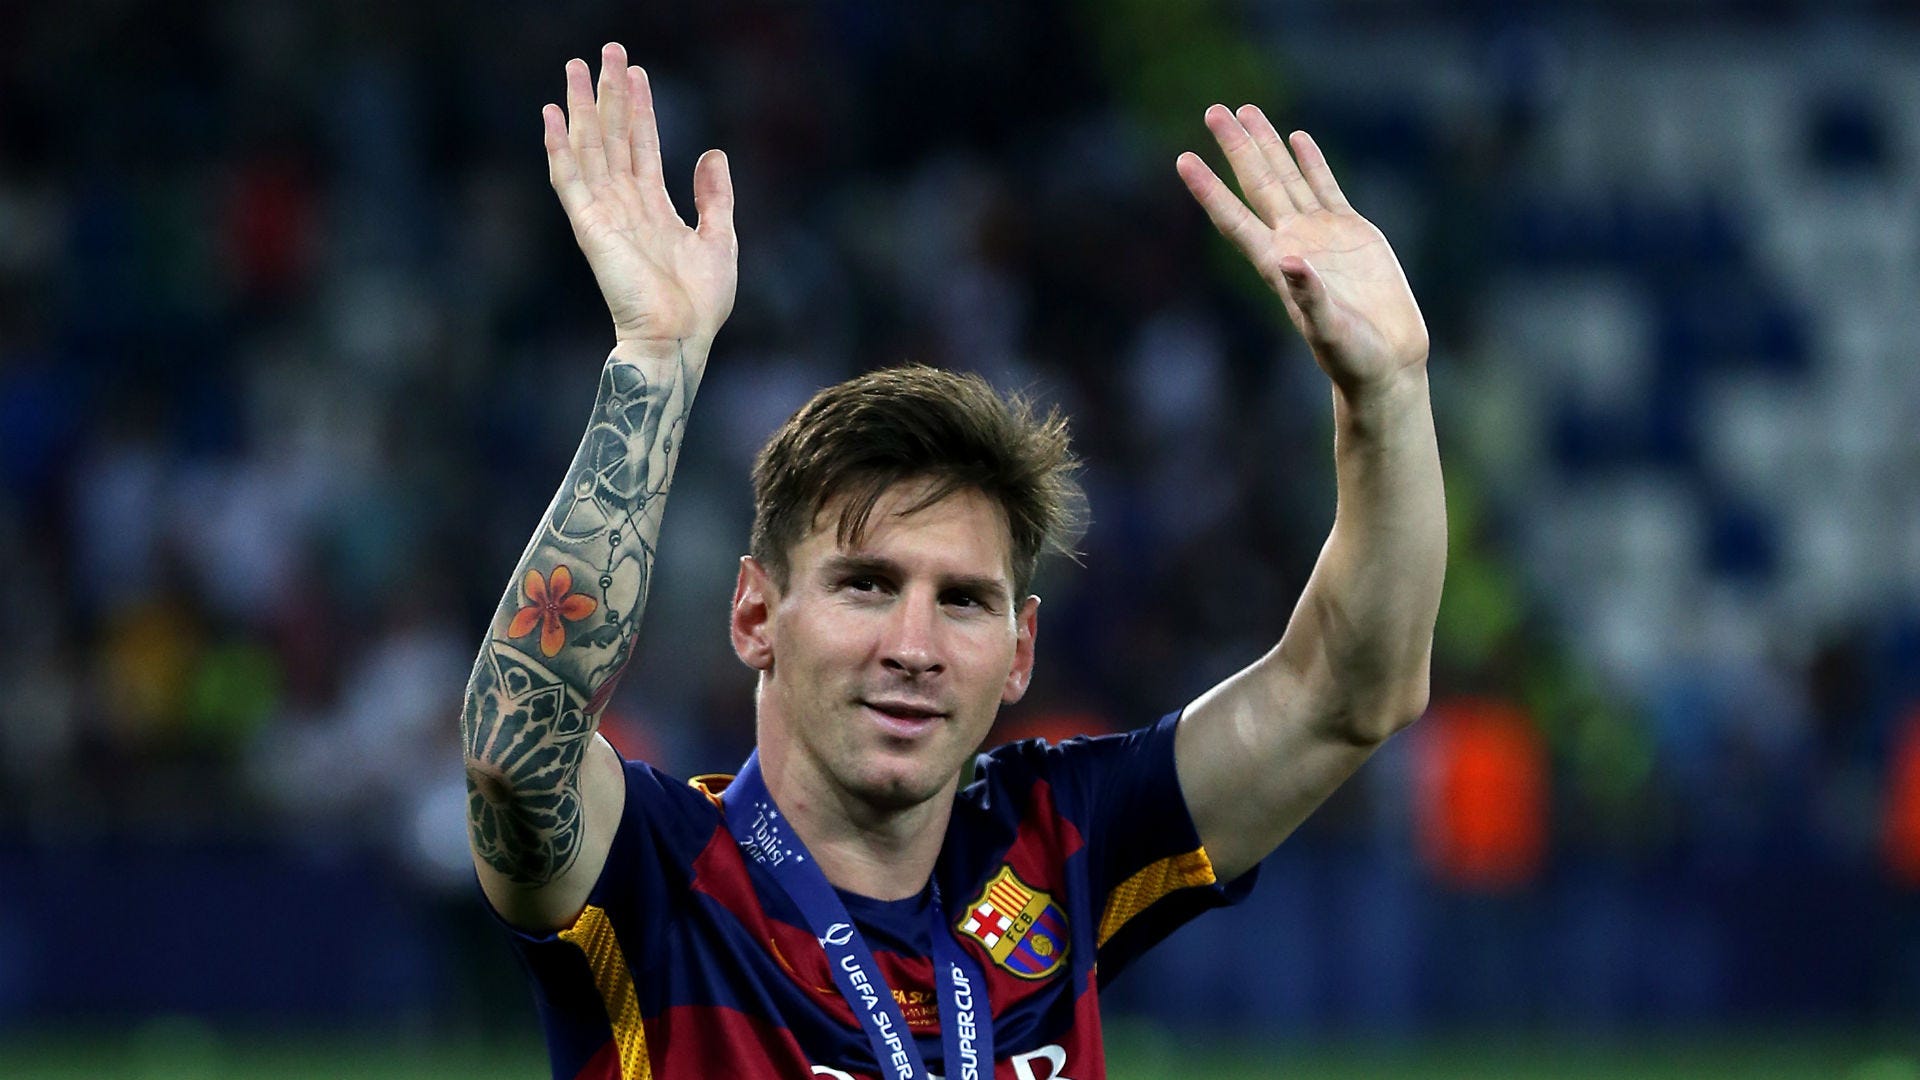 8185 Lionel Messi 2015 Stock Photos HighRes Pictures and Images  Getty  Images